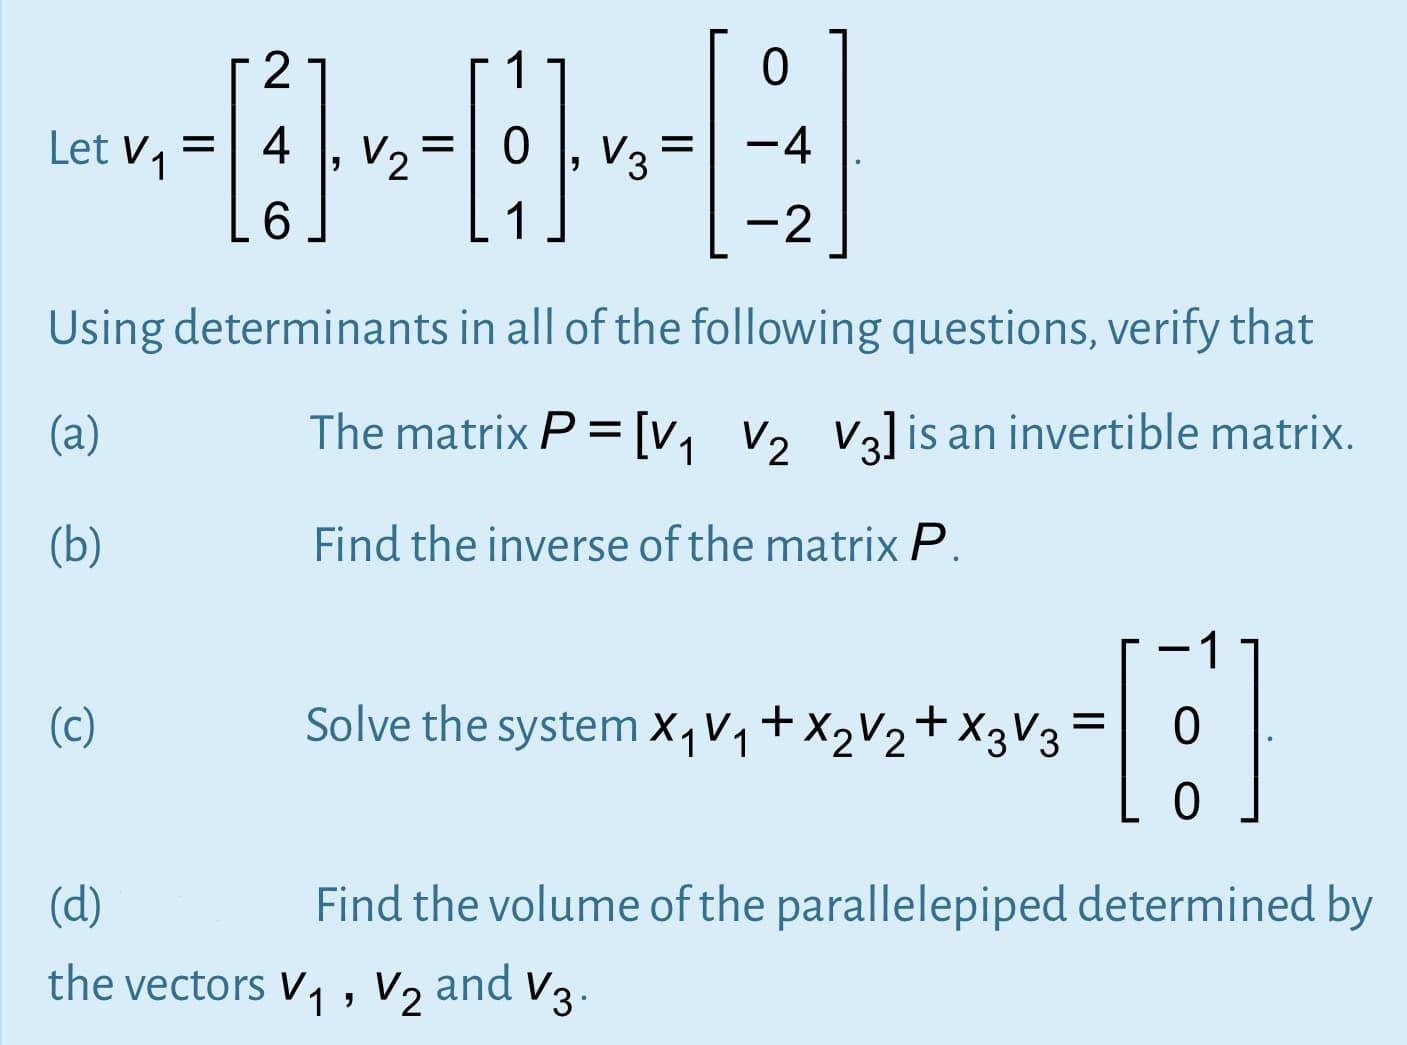 1
Let v, =
4
V2
V3=
-4
6.
1
-2
Using determinants in all of the following questions, verify that
(a)
The matrix P = [v, v, V3]is an invertible matrix.
(b)
Find the inverse of the matrix P.
1
(c)
Solve the system X,Vq+X2V2+X3V3
